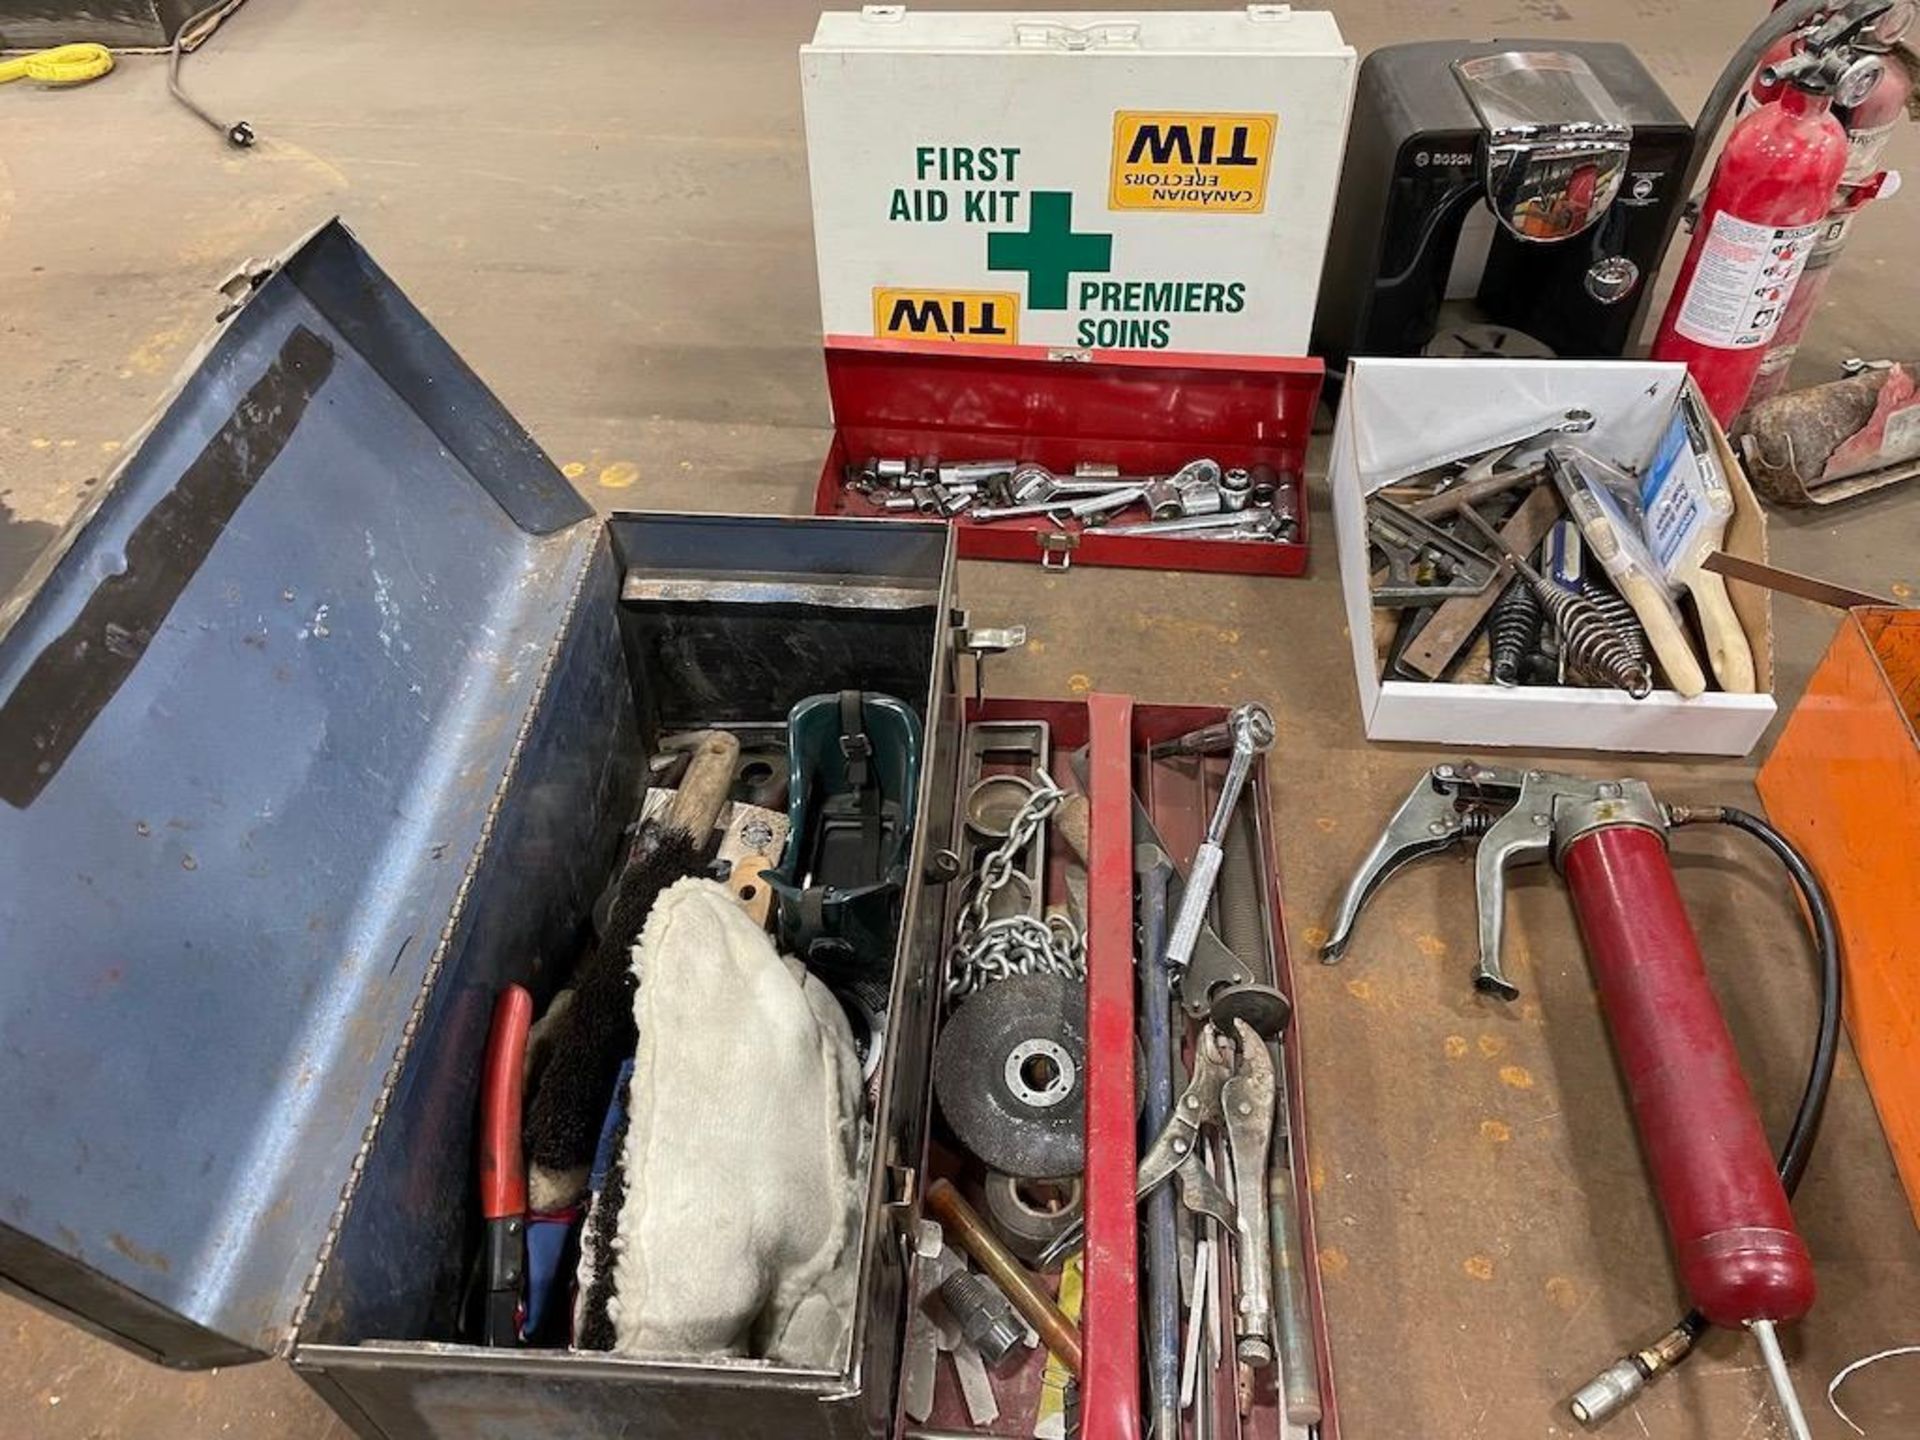 ASSORTED HAND TOOLS, TOOL BOXES, WORK LIGHT, LETTER SET, FIRST AID, FIRE EXTINGUISHERS, BOSCH TASSIM - Image 2 of 3